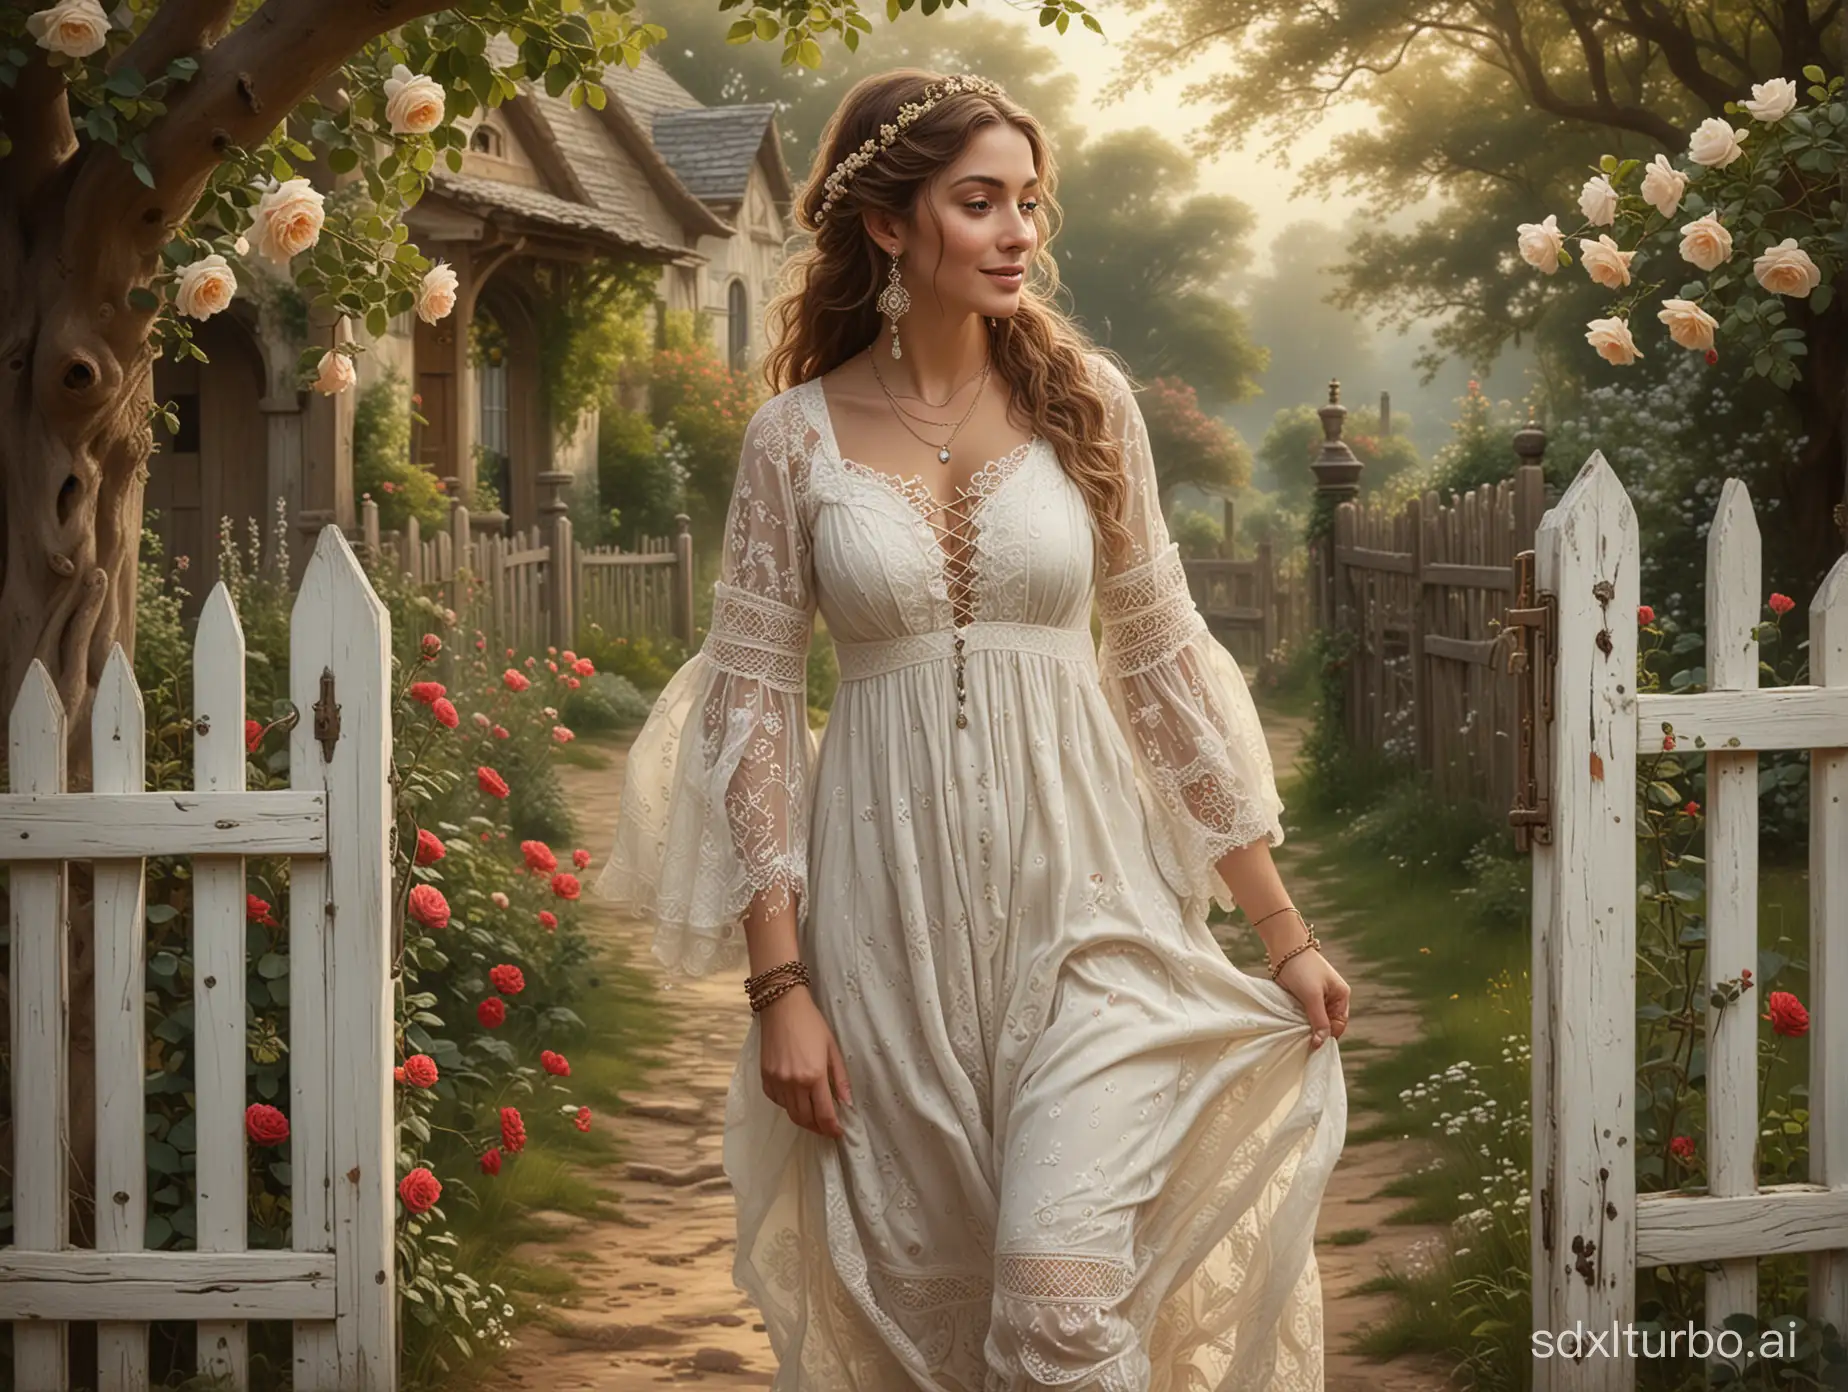 Create a hyper-realistic oil painting of a cheerful woman in a romanticized bohemian setting, wearing an intricately patterned white vintage Renaissance dress with lace and pattern work, adorned with multiple bracelets and an earring, and roses in her hair. She is walking towards the viewers, integrated into the existing tranquil fantasy setting with the old cottage, ancient tree, weathered wooden gate, rustic fence, and pastoral mood.